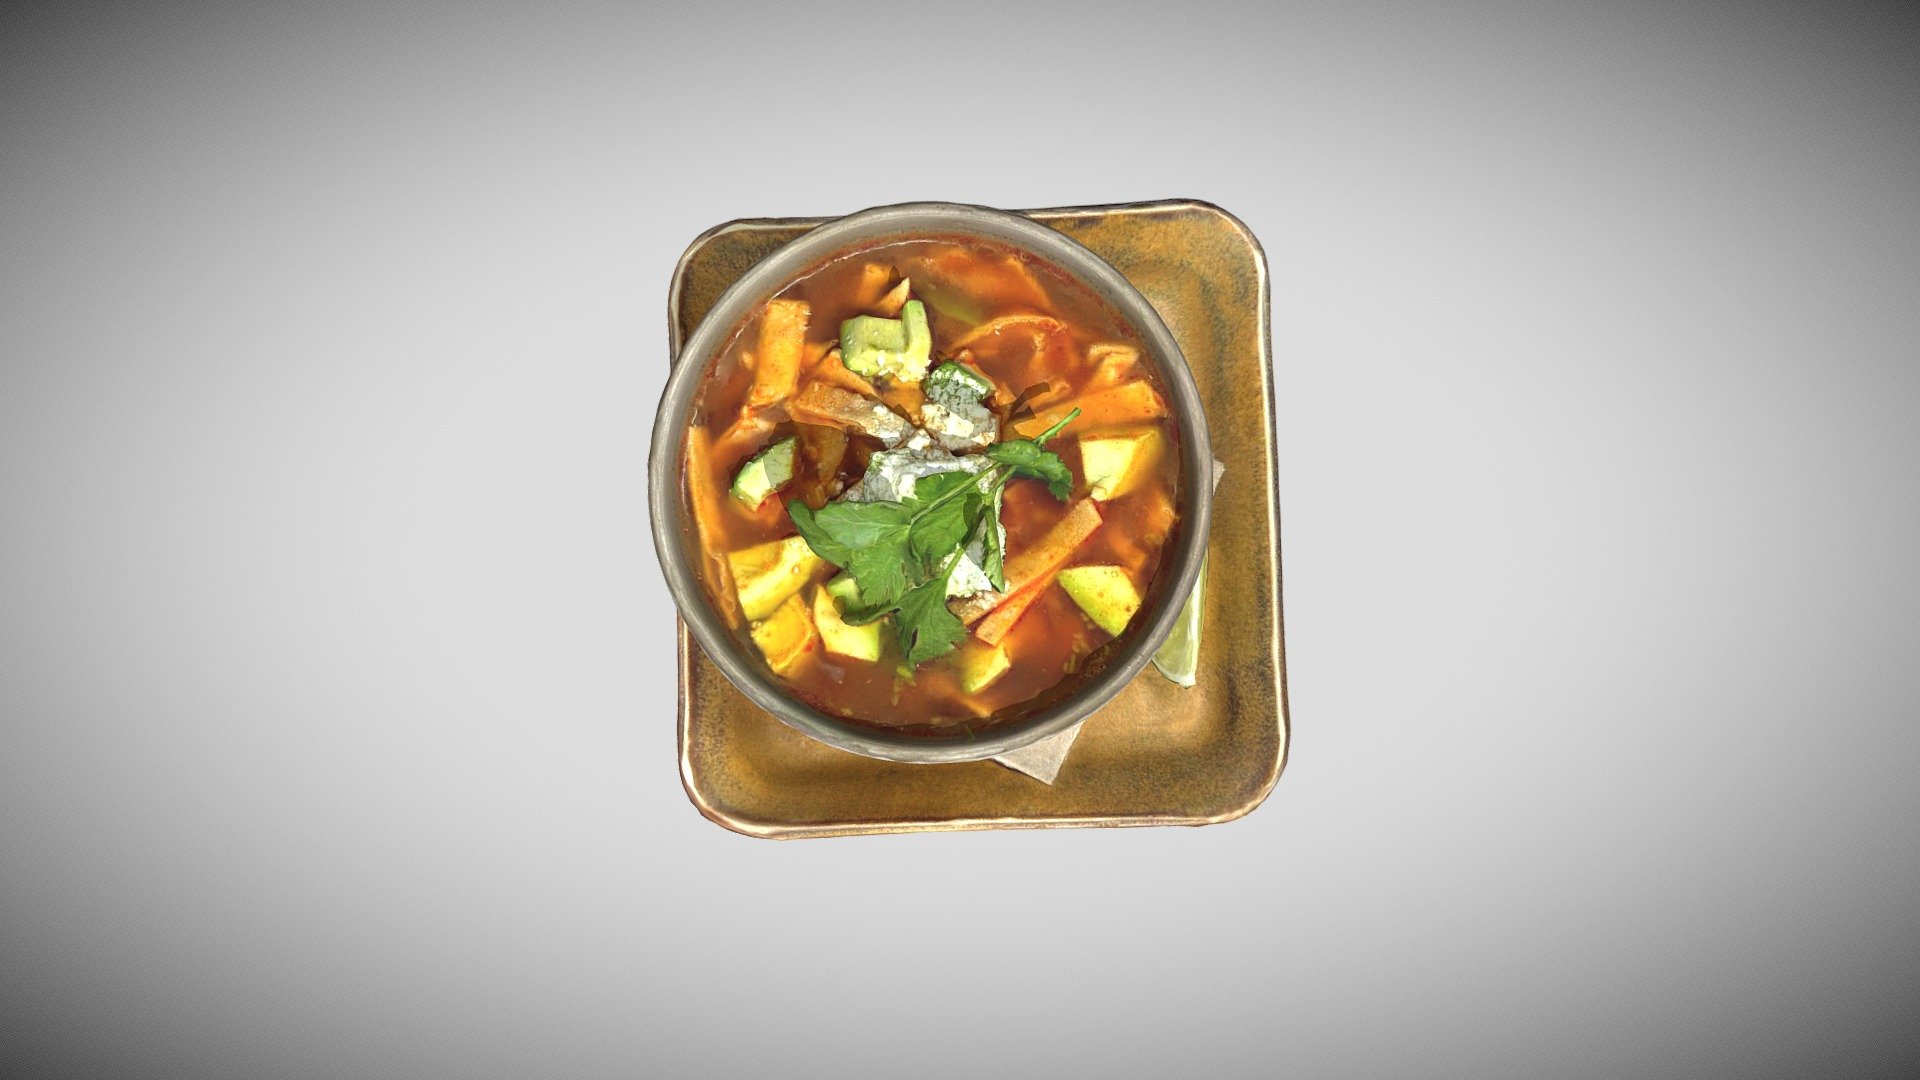 Bowl Chicken tortilla soup from Copita in Sausalito, Ca - Bowl Tortilla Soup Copita - Buy Royalty Free 3D model by Augmented Reality Marketing Solutions LLC (@AugRealMarketing) 3d model